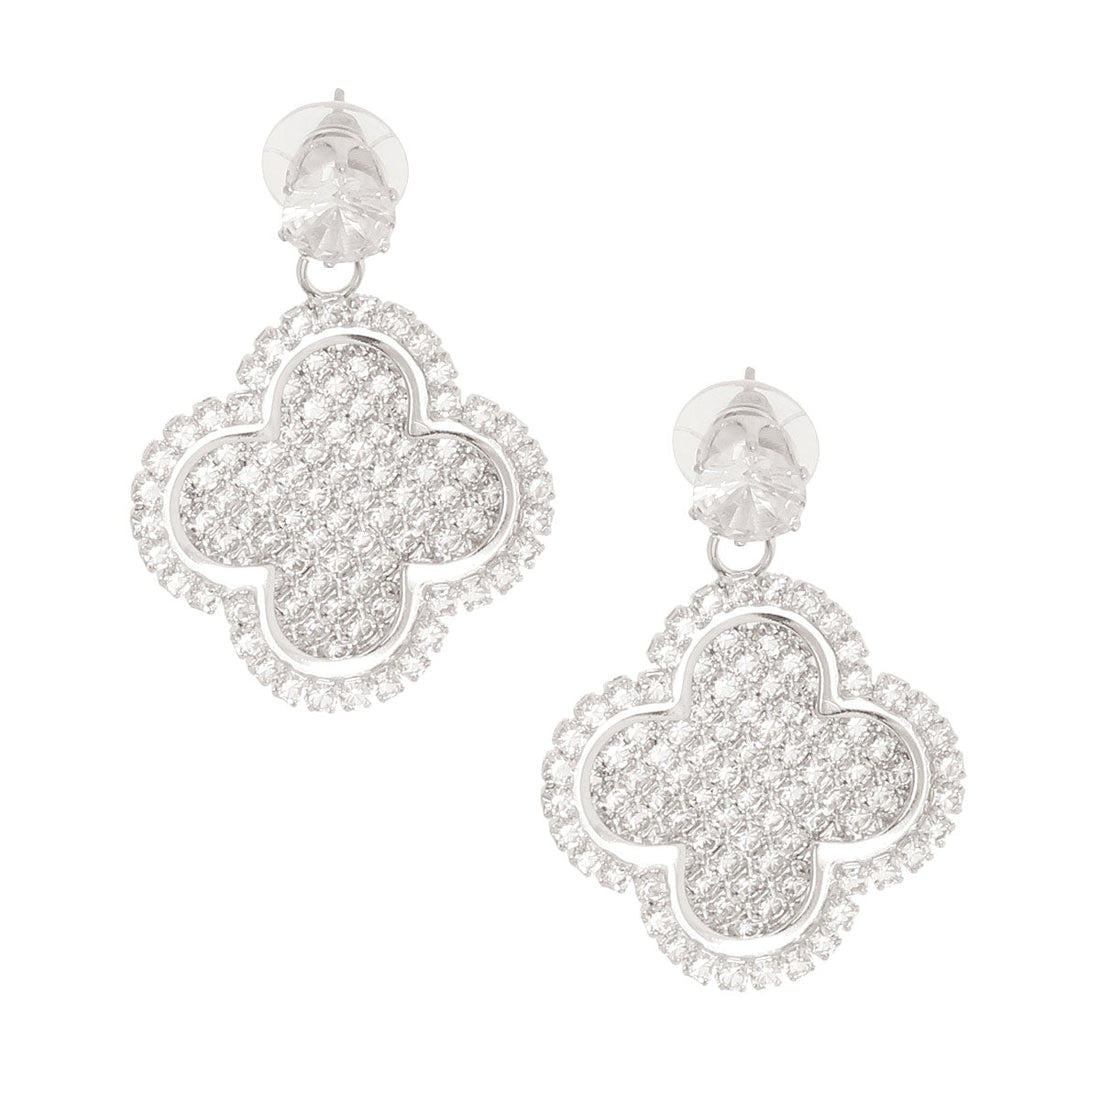 Silver Pave Clover Earrings